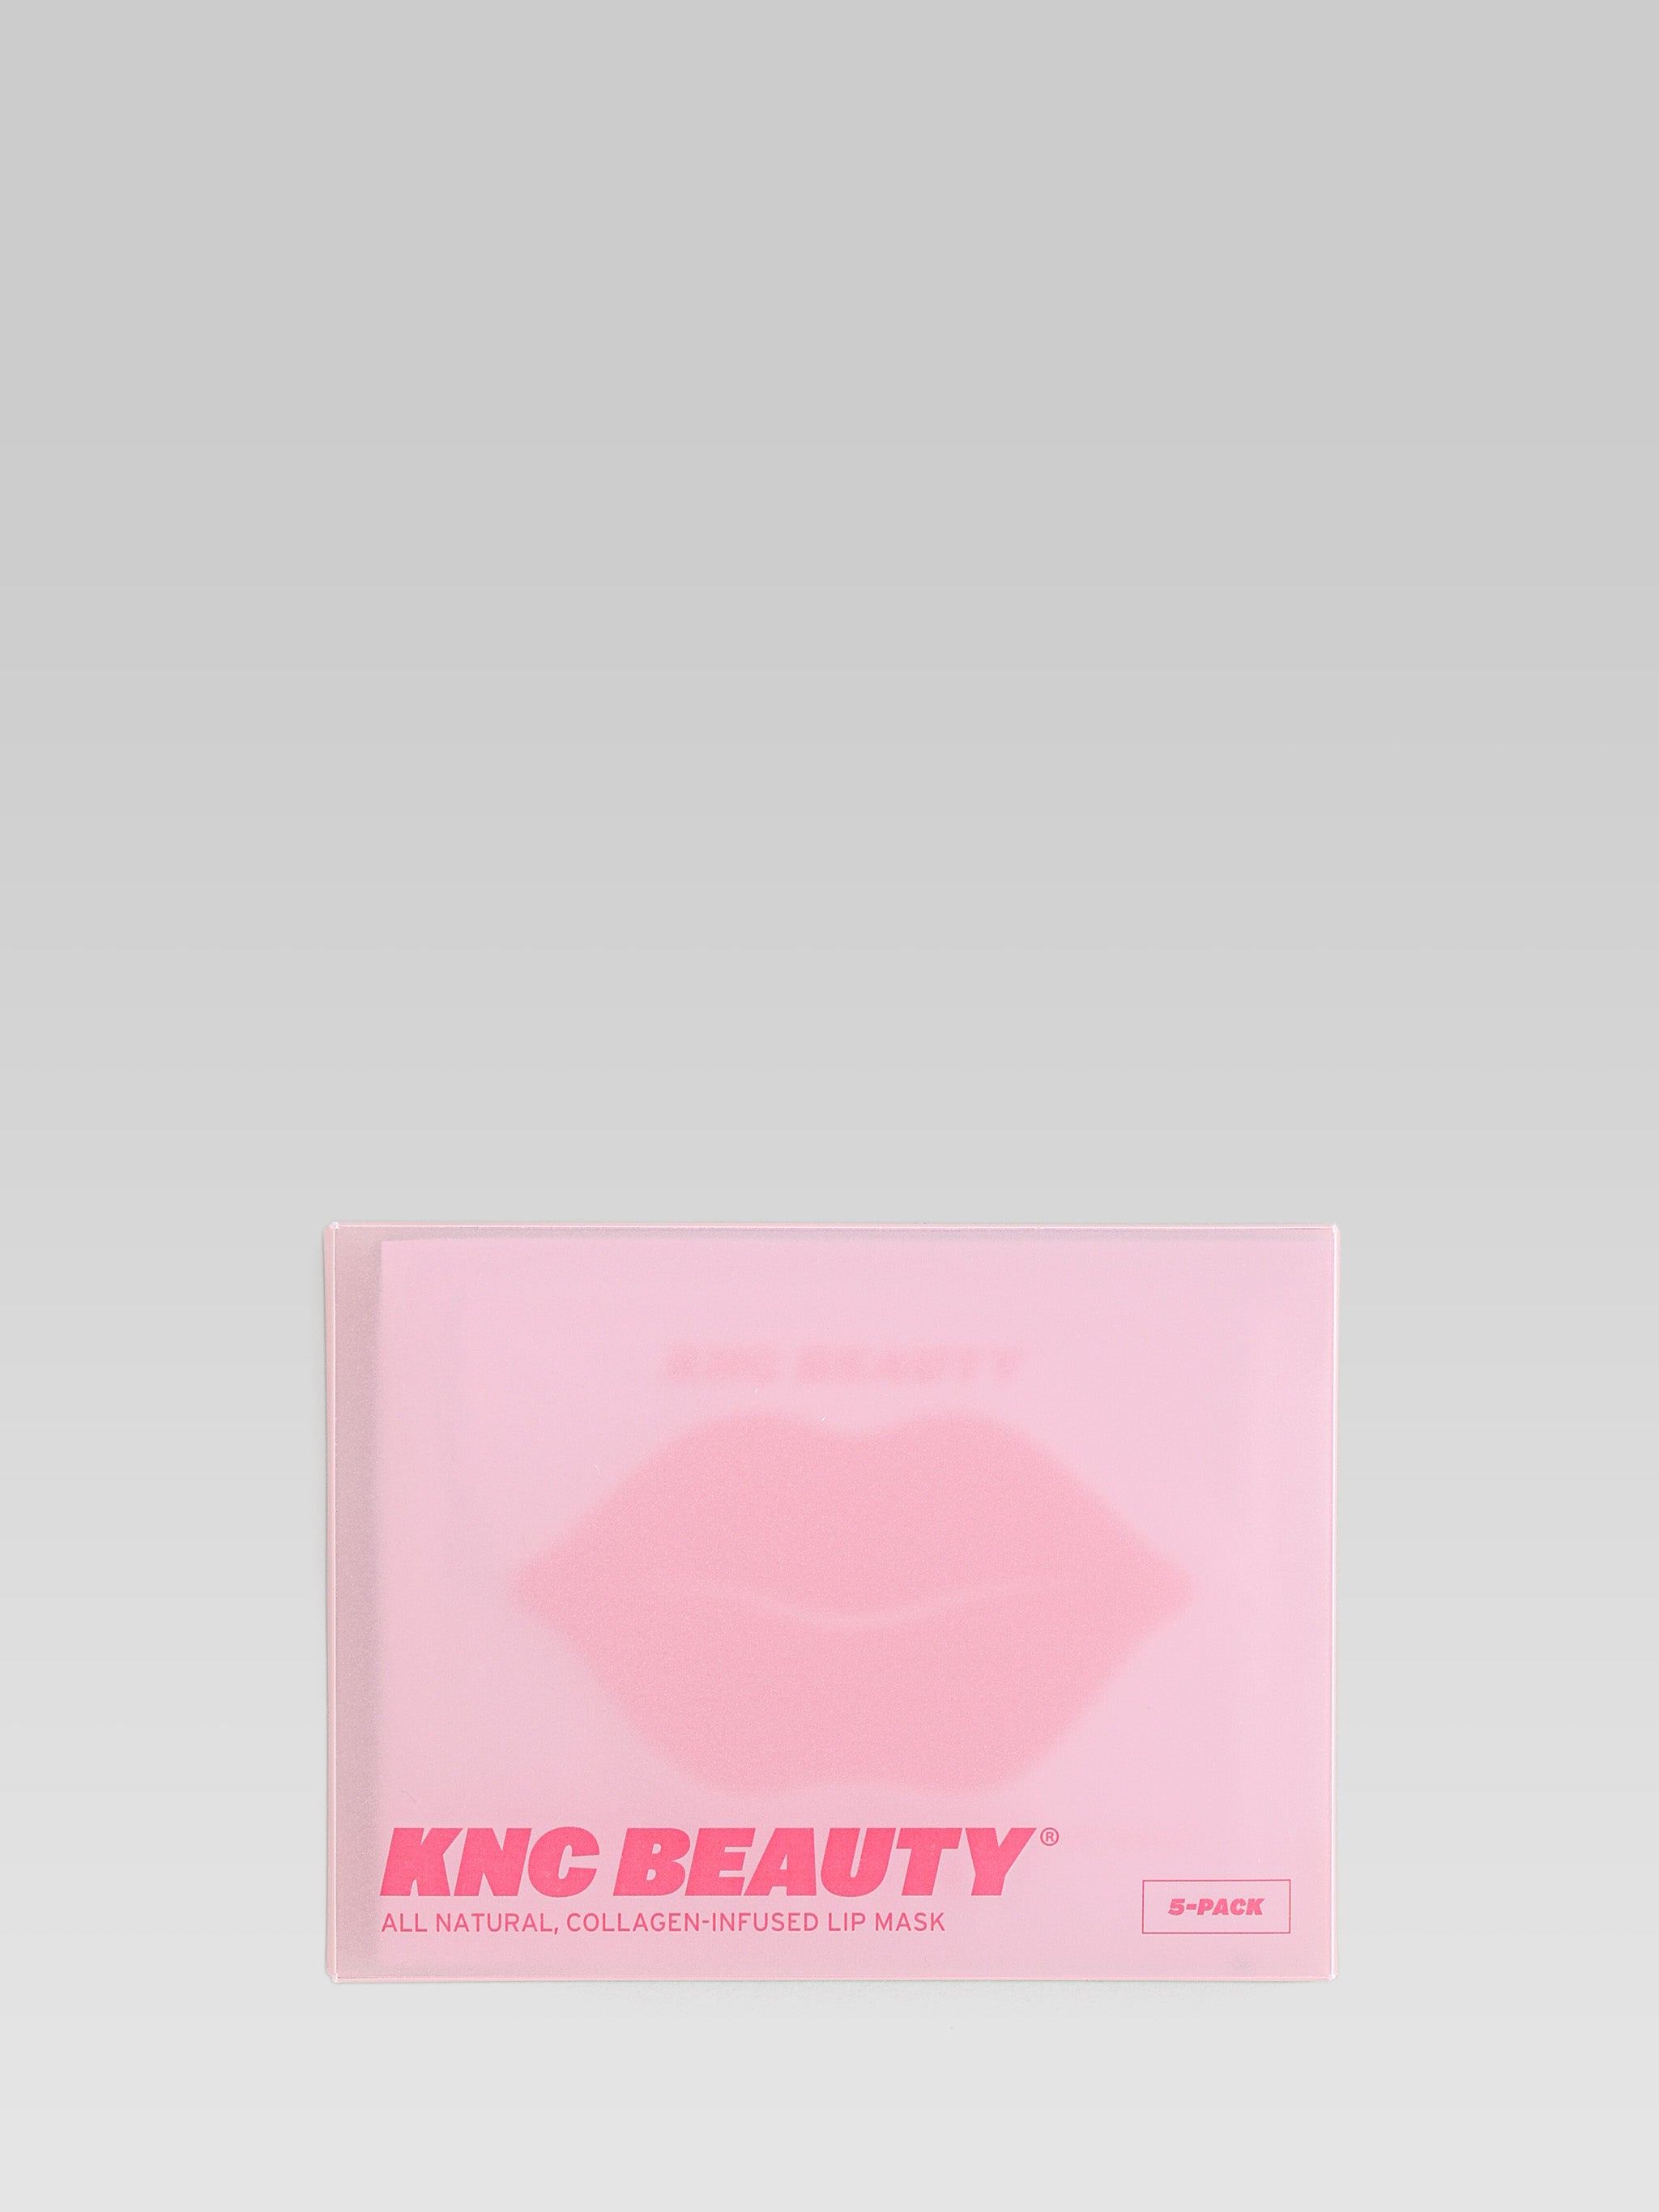 KNC BEAUTY The Lip Mask product packaging